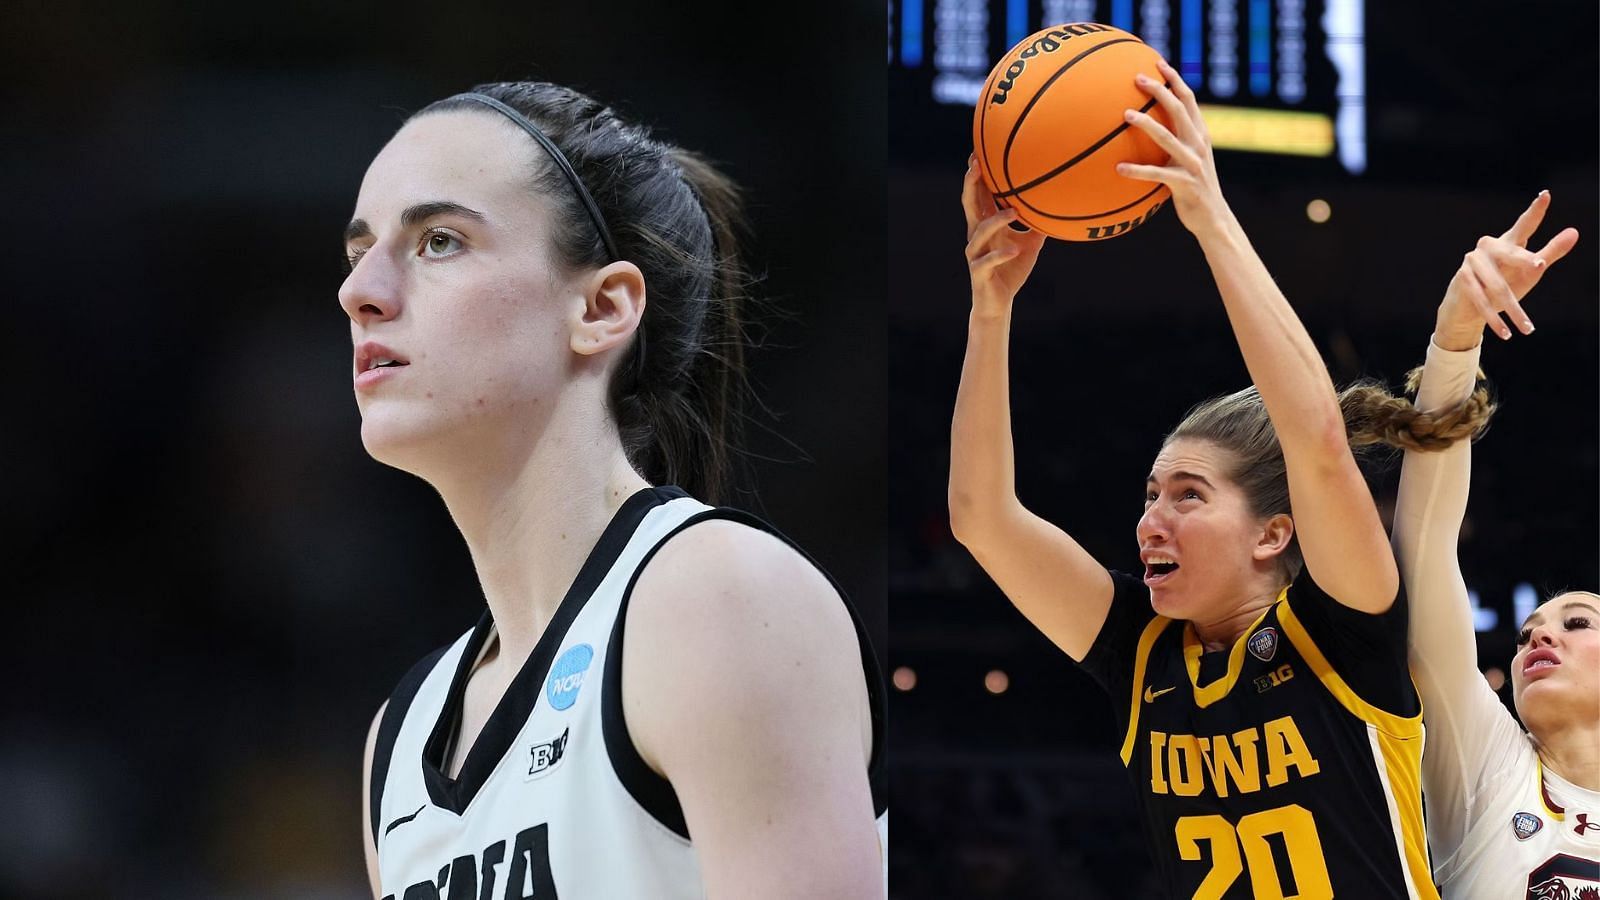 Iowa stars Caitlin Clark and Kate Martin could be first round WNBA Draft picks.